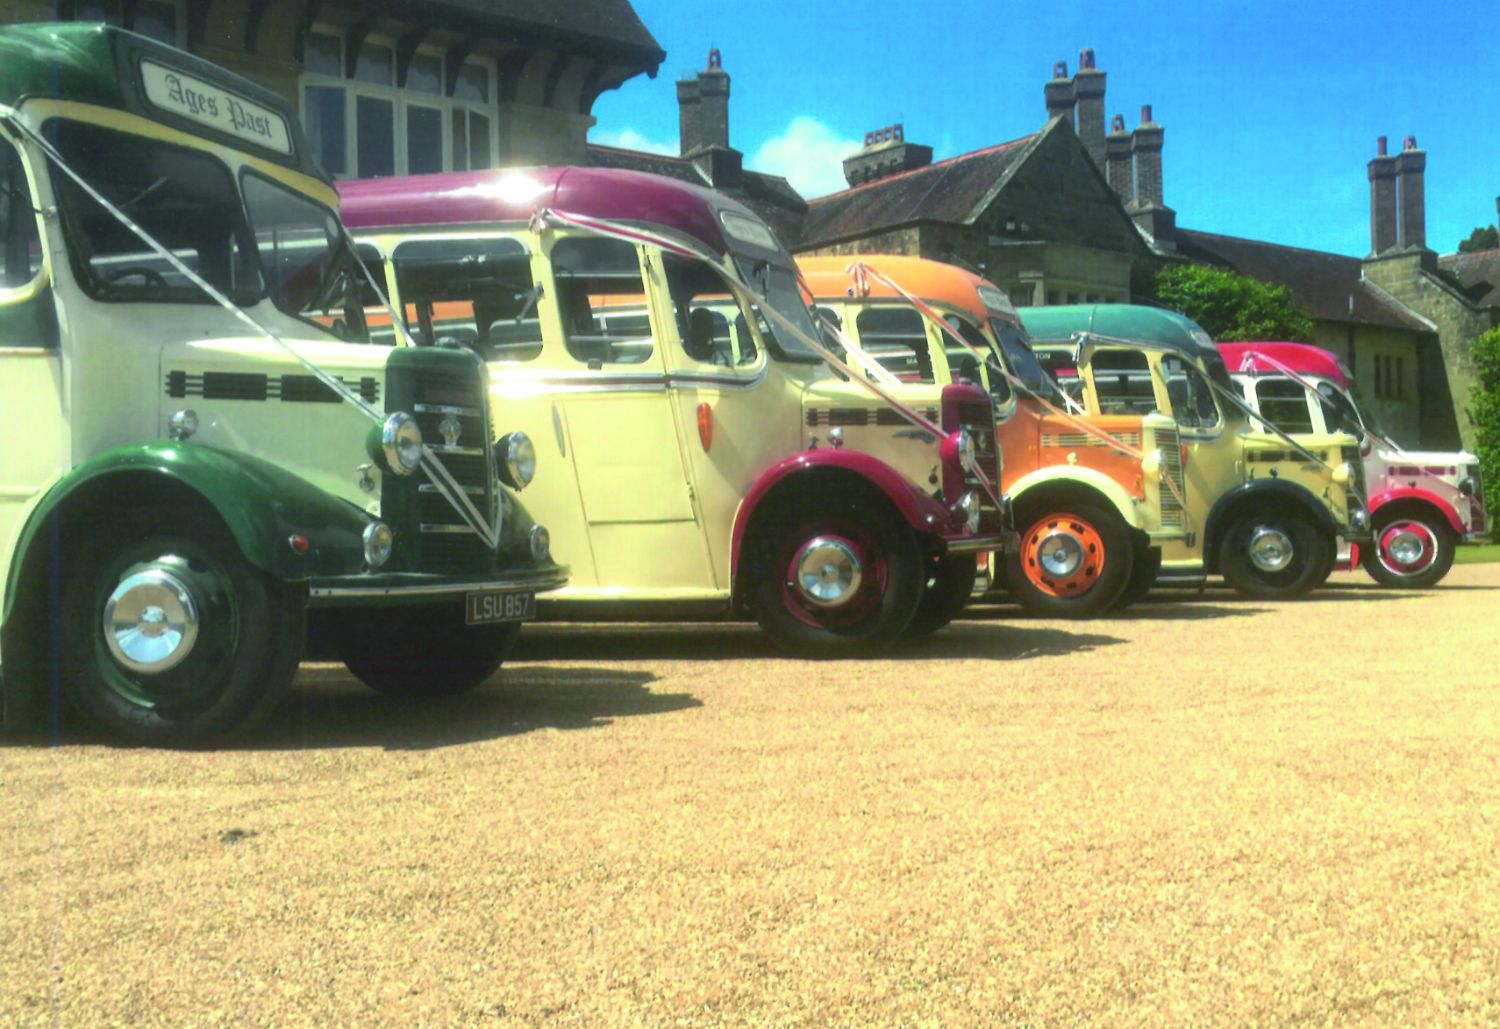 All five OBs lined up together at Coudray Park, Midhurst, showing their contrasting liveries. Hiring all five for a job has become increasingly popular in recent years